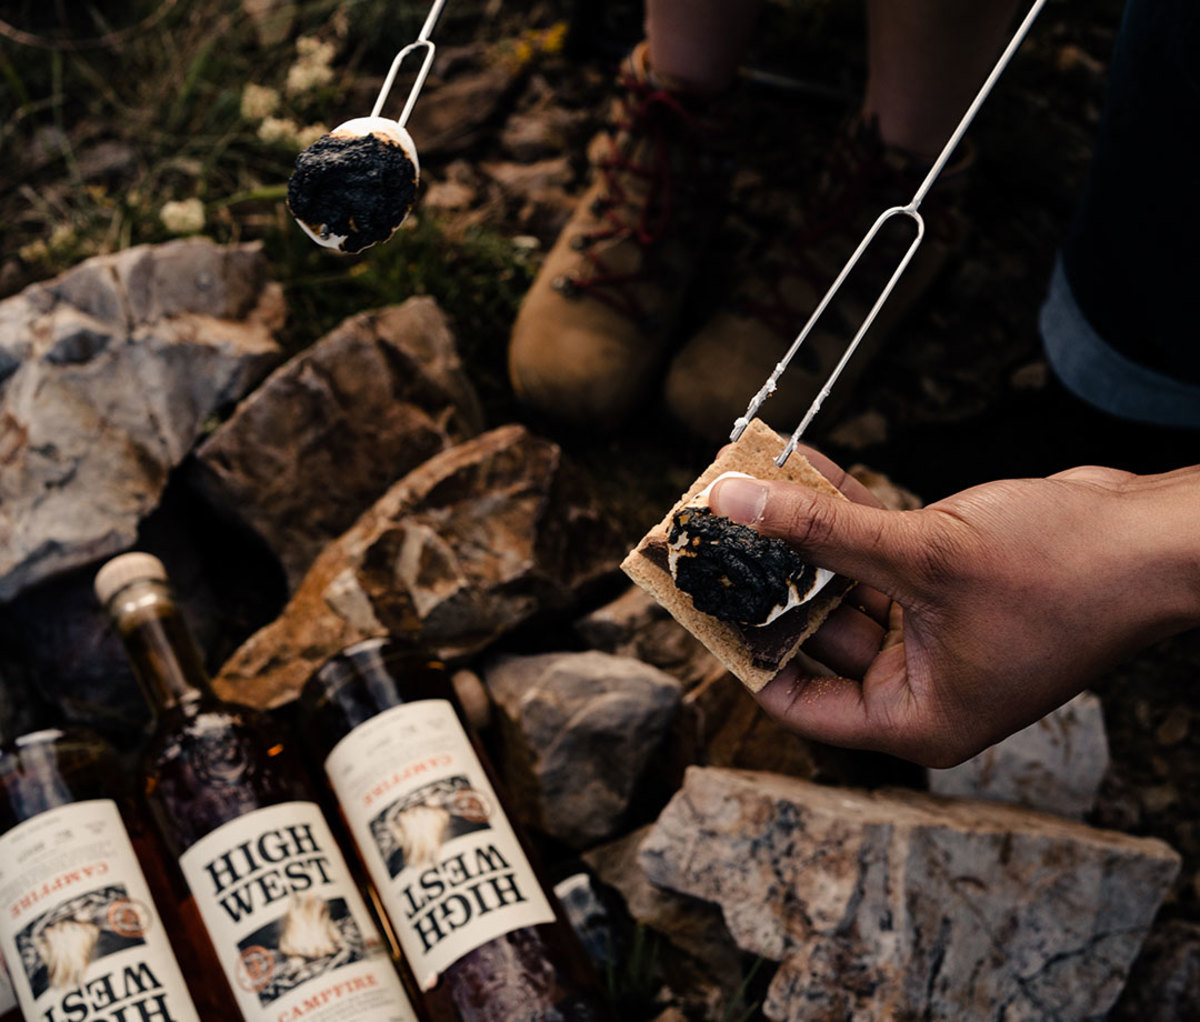 Bottles of High West Campfire whiskey beneath man's hands holding s'mores and stick with marshmallow